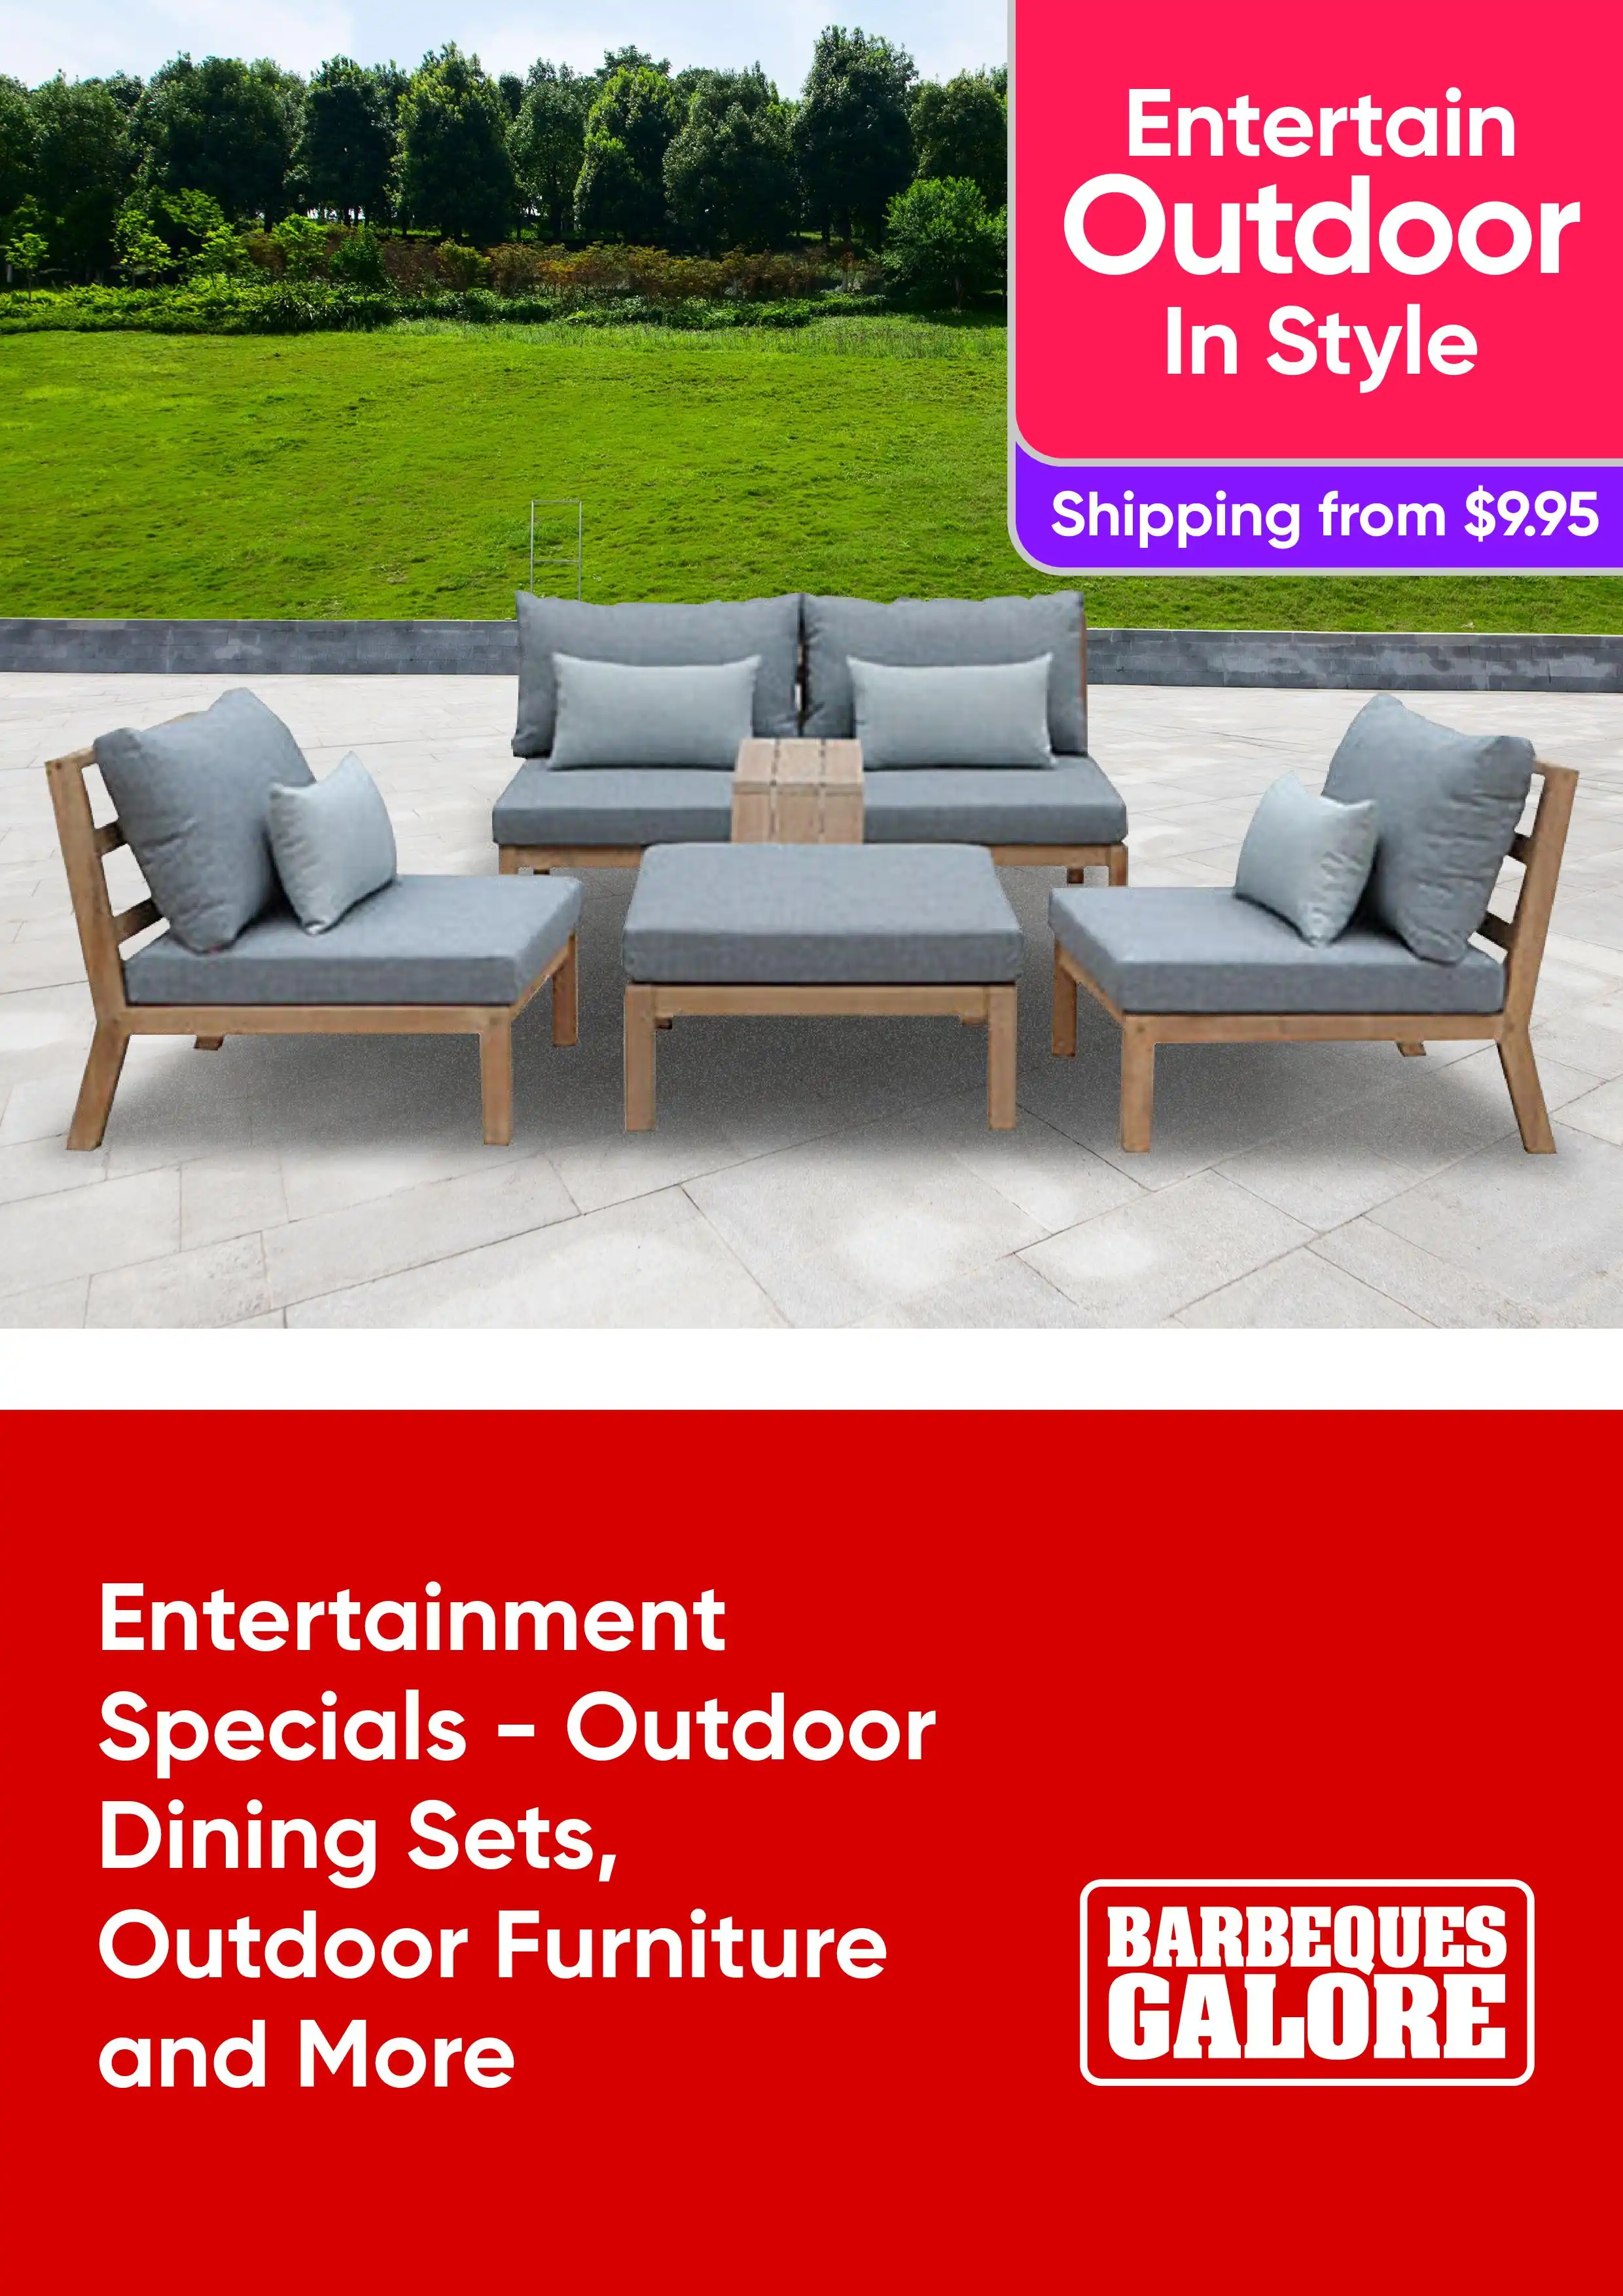 Entertainment Specials - Outdoor Dining Sets, Outdoor Furniture and More